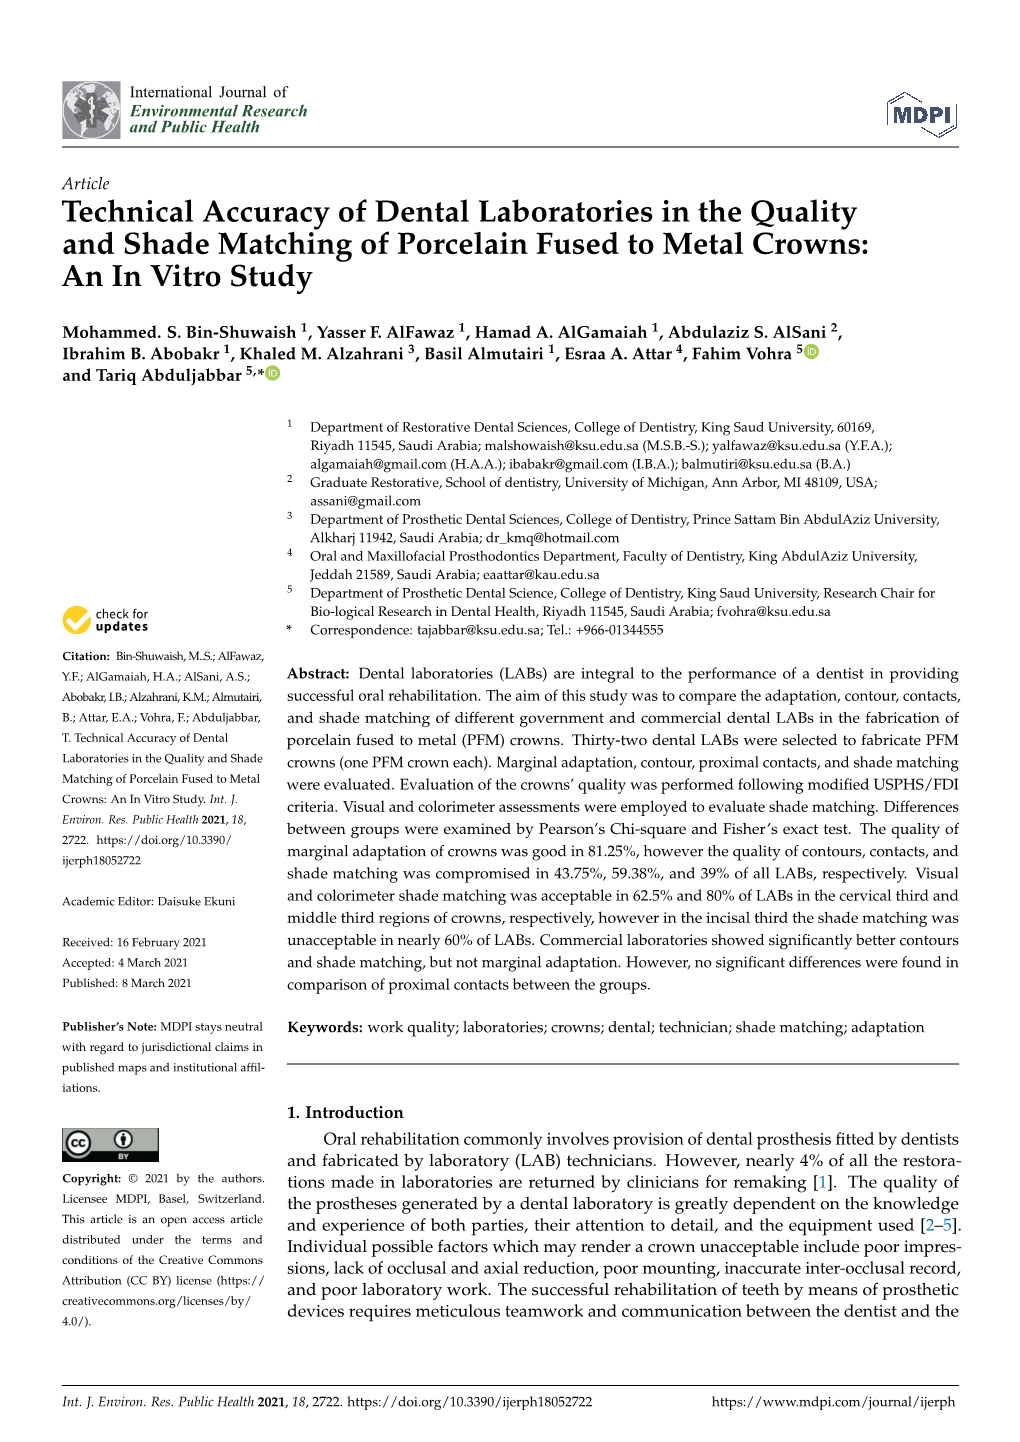 Technical Accuracy of Dental Laboratories in the Quality and Shade Matching of Porcelain Fused to Metal Crowns: an in Vitro Study